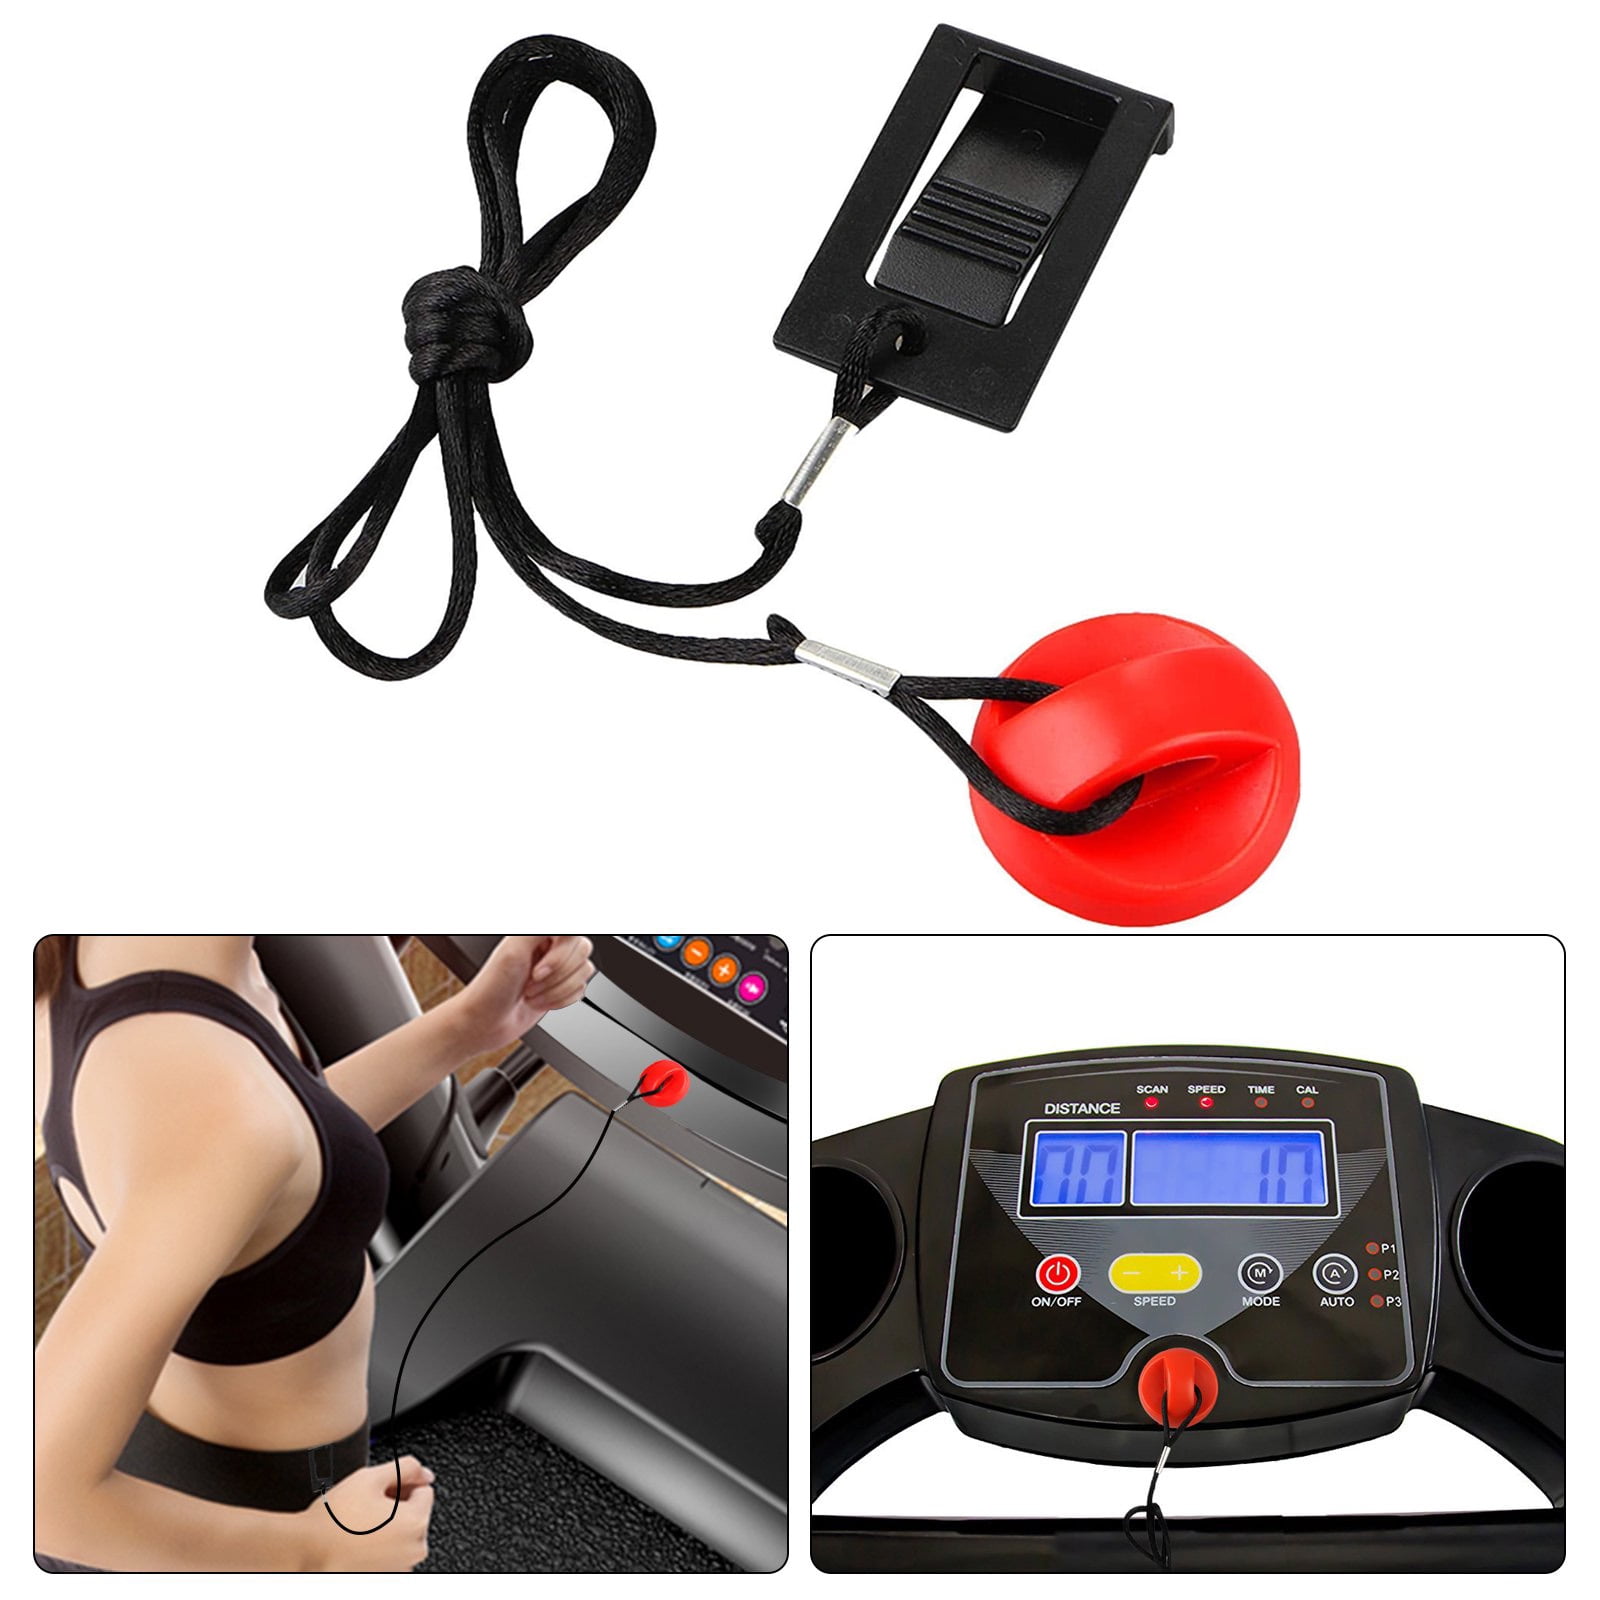 2Pcs-Trumpet Running Machine Safety Key Treadmill Magnetic Security Switch D5O7 